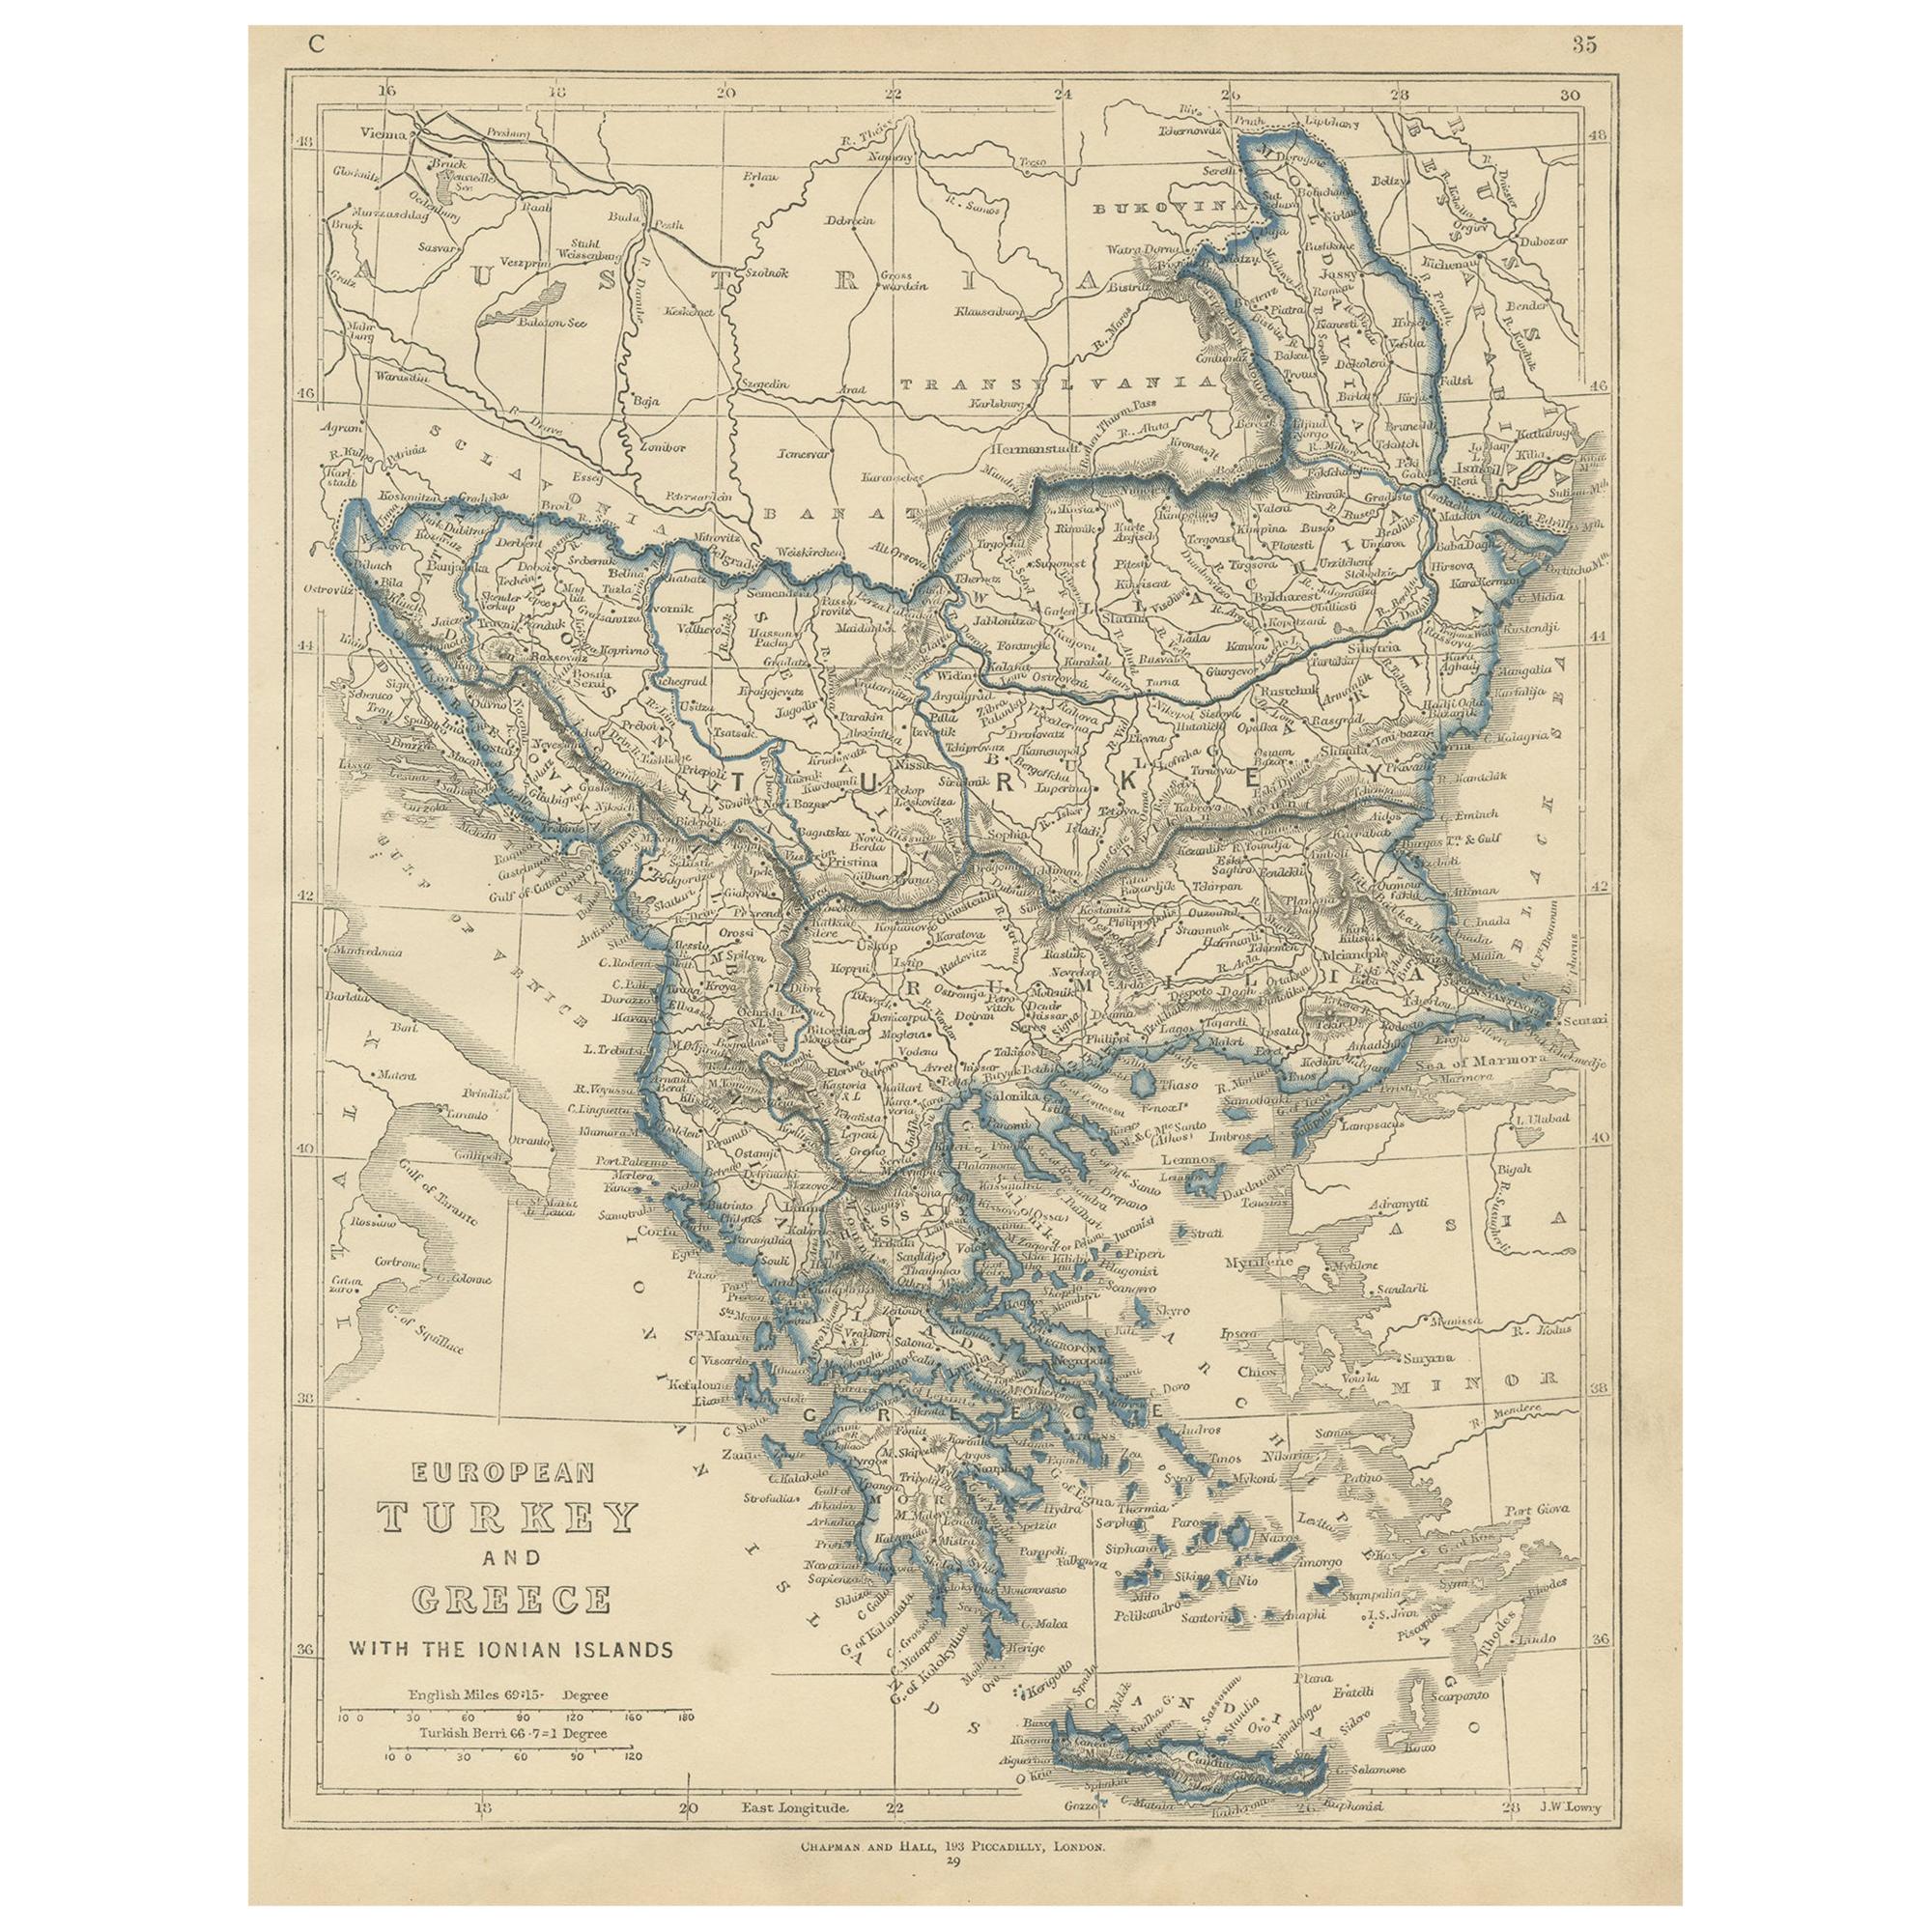 Antique Map of European Turkey and Greece by Lowry '1852'